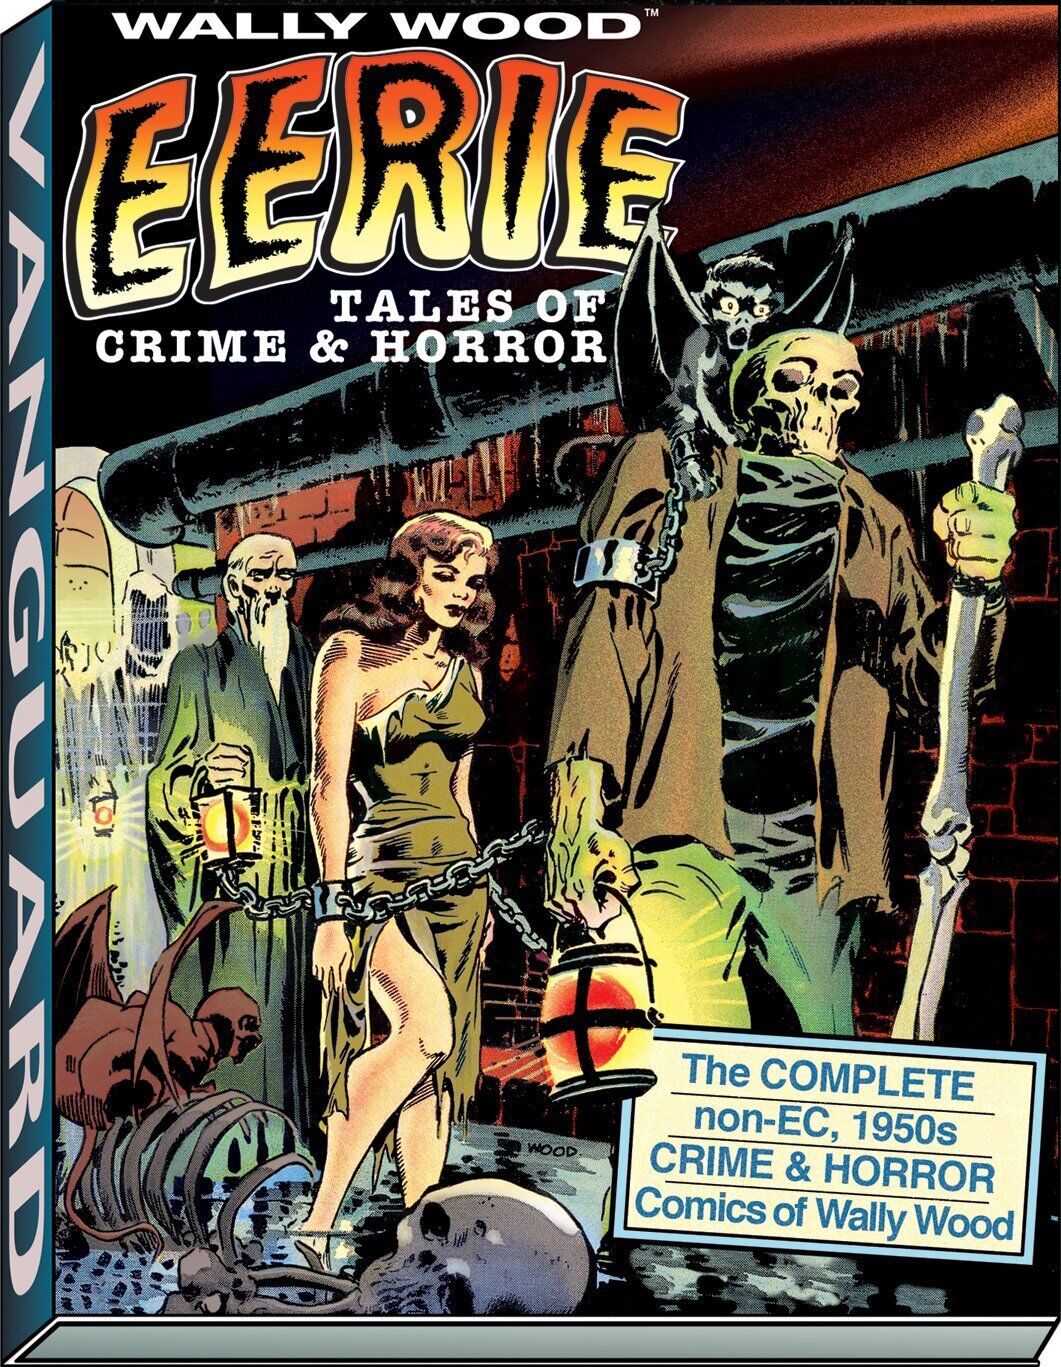 Wallace Wood Wally Wood: Eerie Tales of Crime & Horror (Paperback)